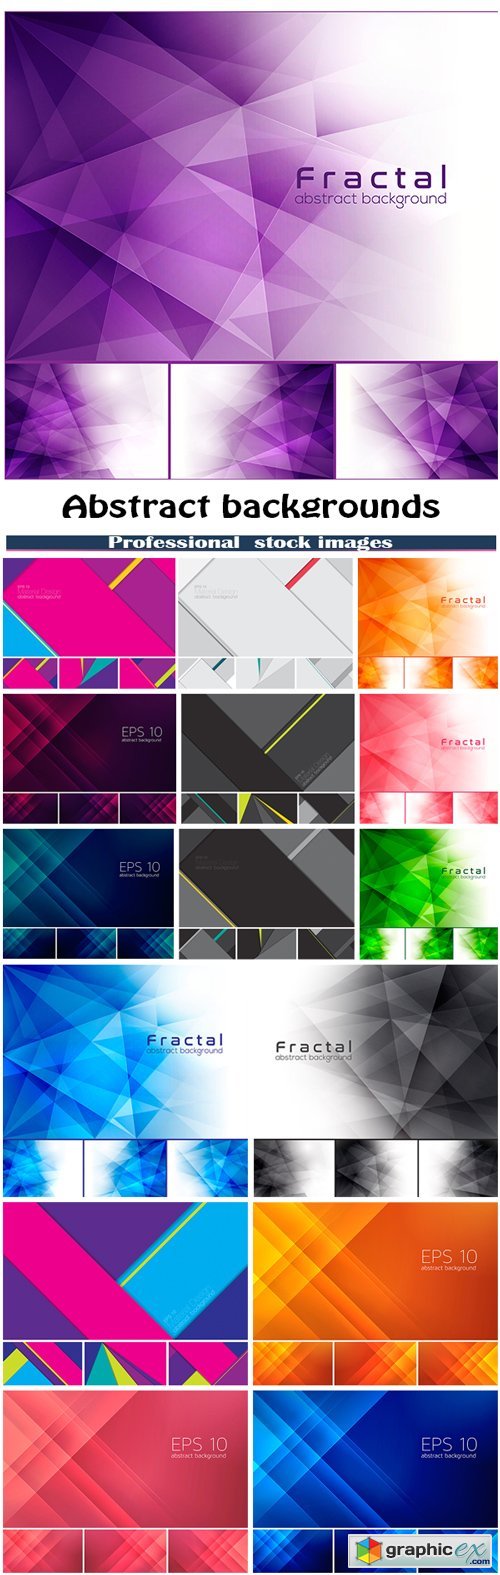 Fractal, stripes and material design abstract background